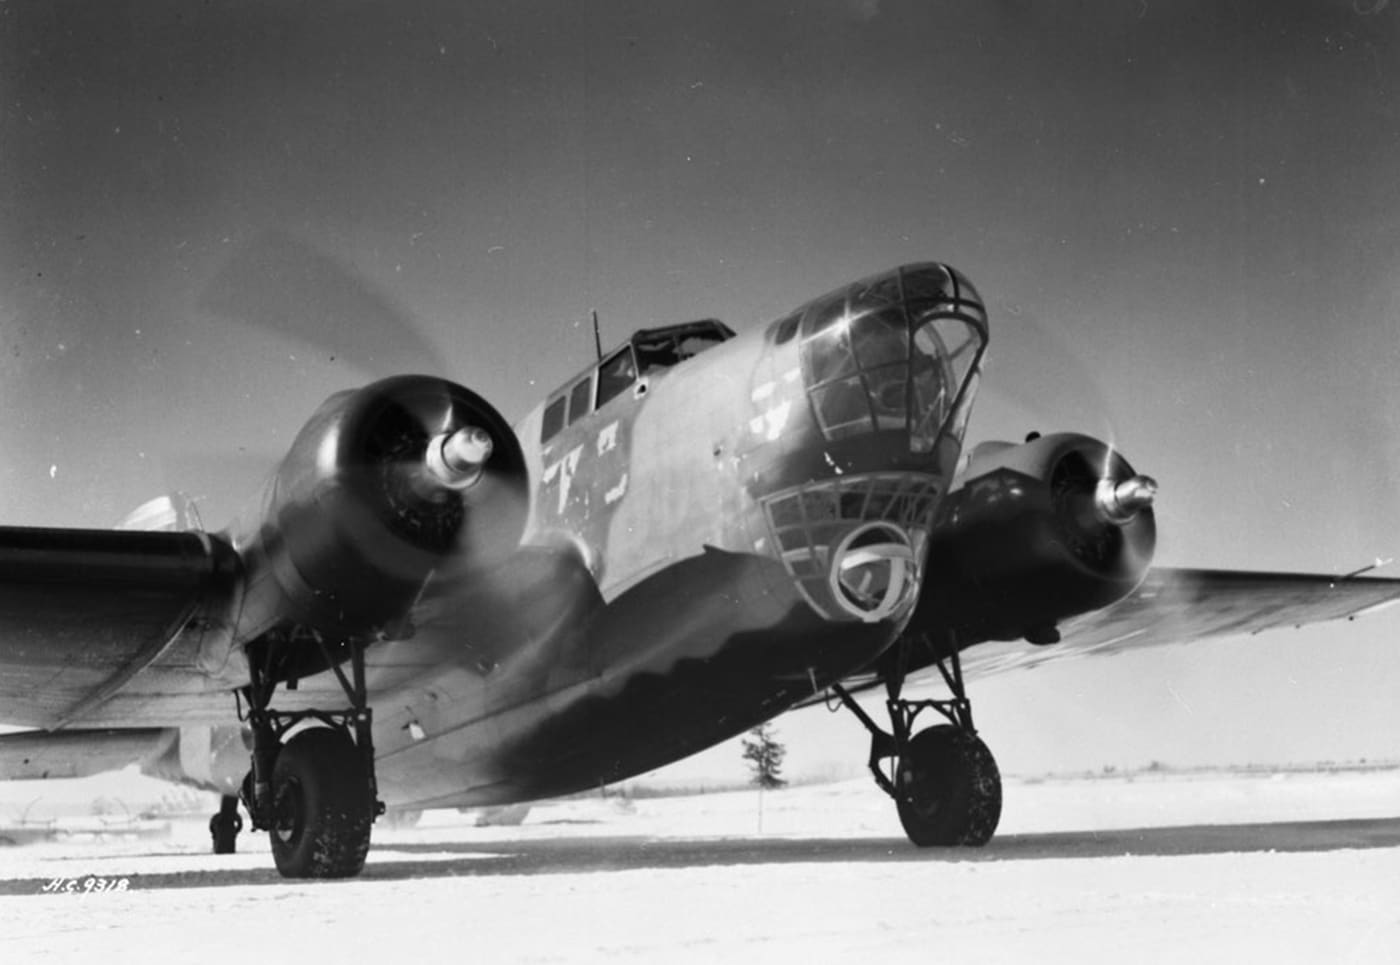 In this photo we see the upgraded nose plexiglas used on the B-18A. B-18As also received more powerful radial engines to improve airspeed and runway length requirements. The fuselage of the aircraft remained the same, keeping the same about of cargo space as had been available since the first prototype was developed in 1934.